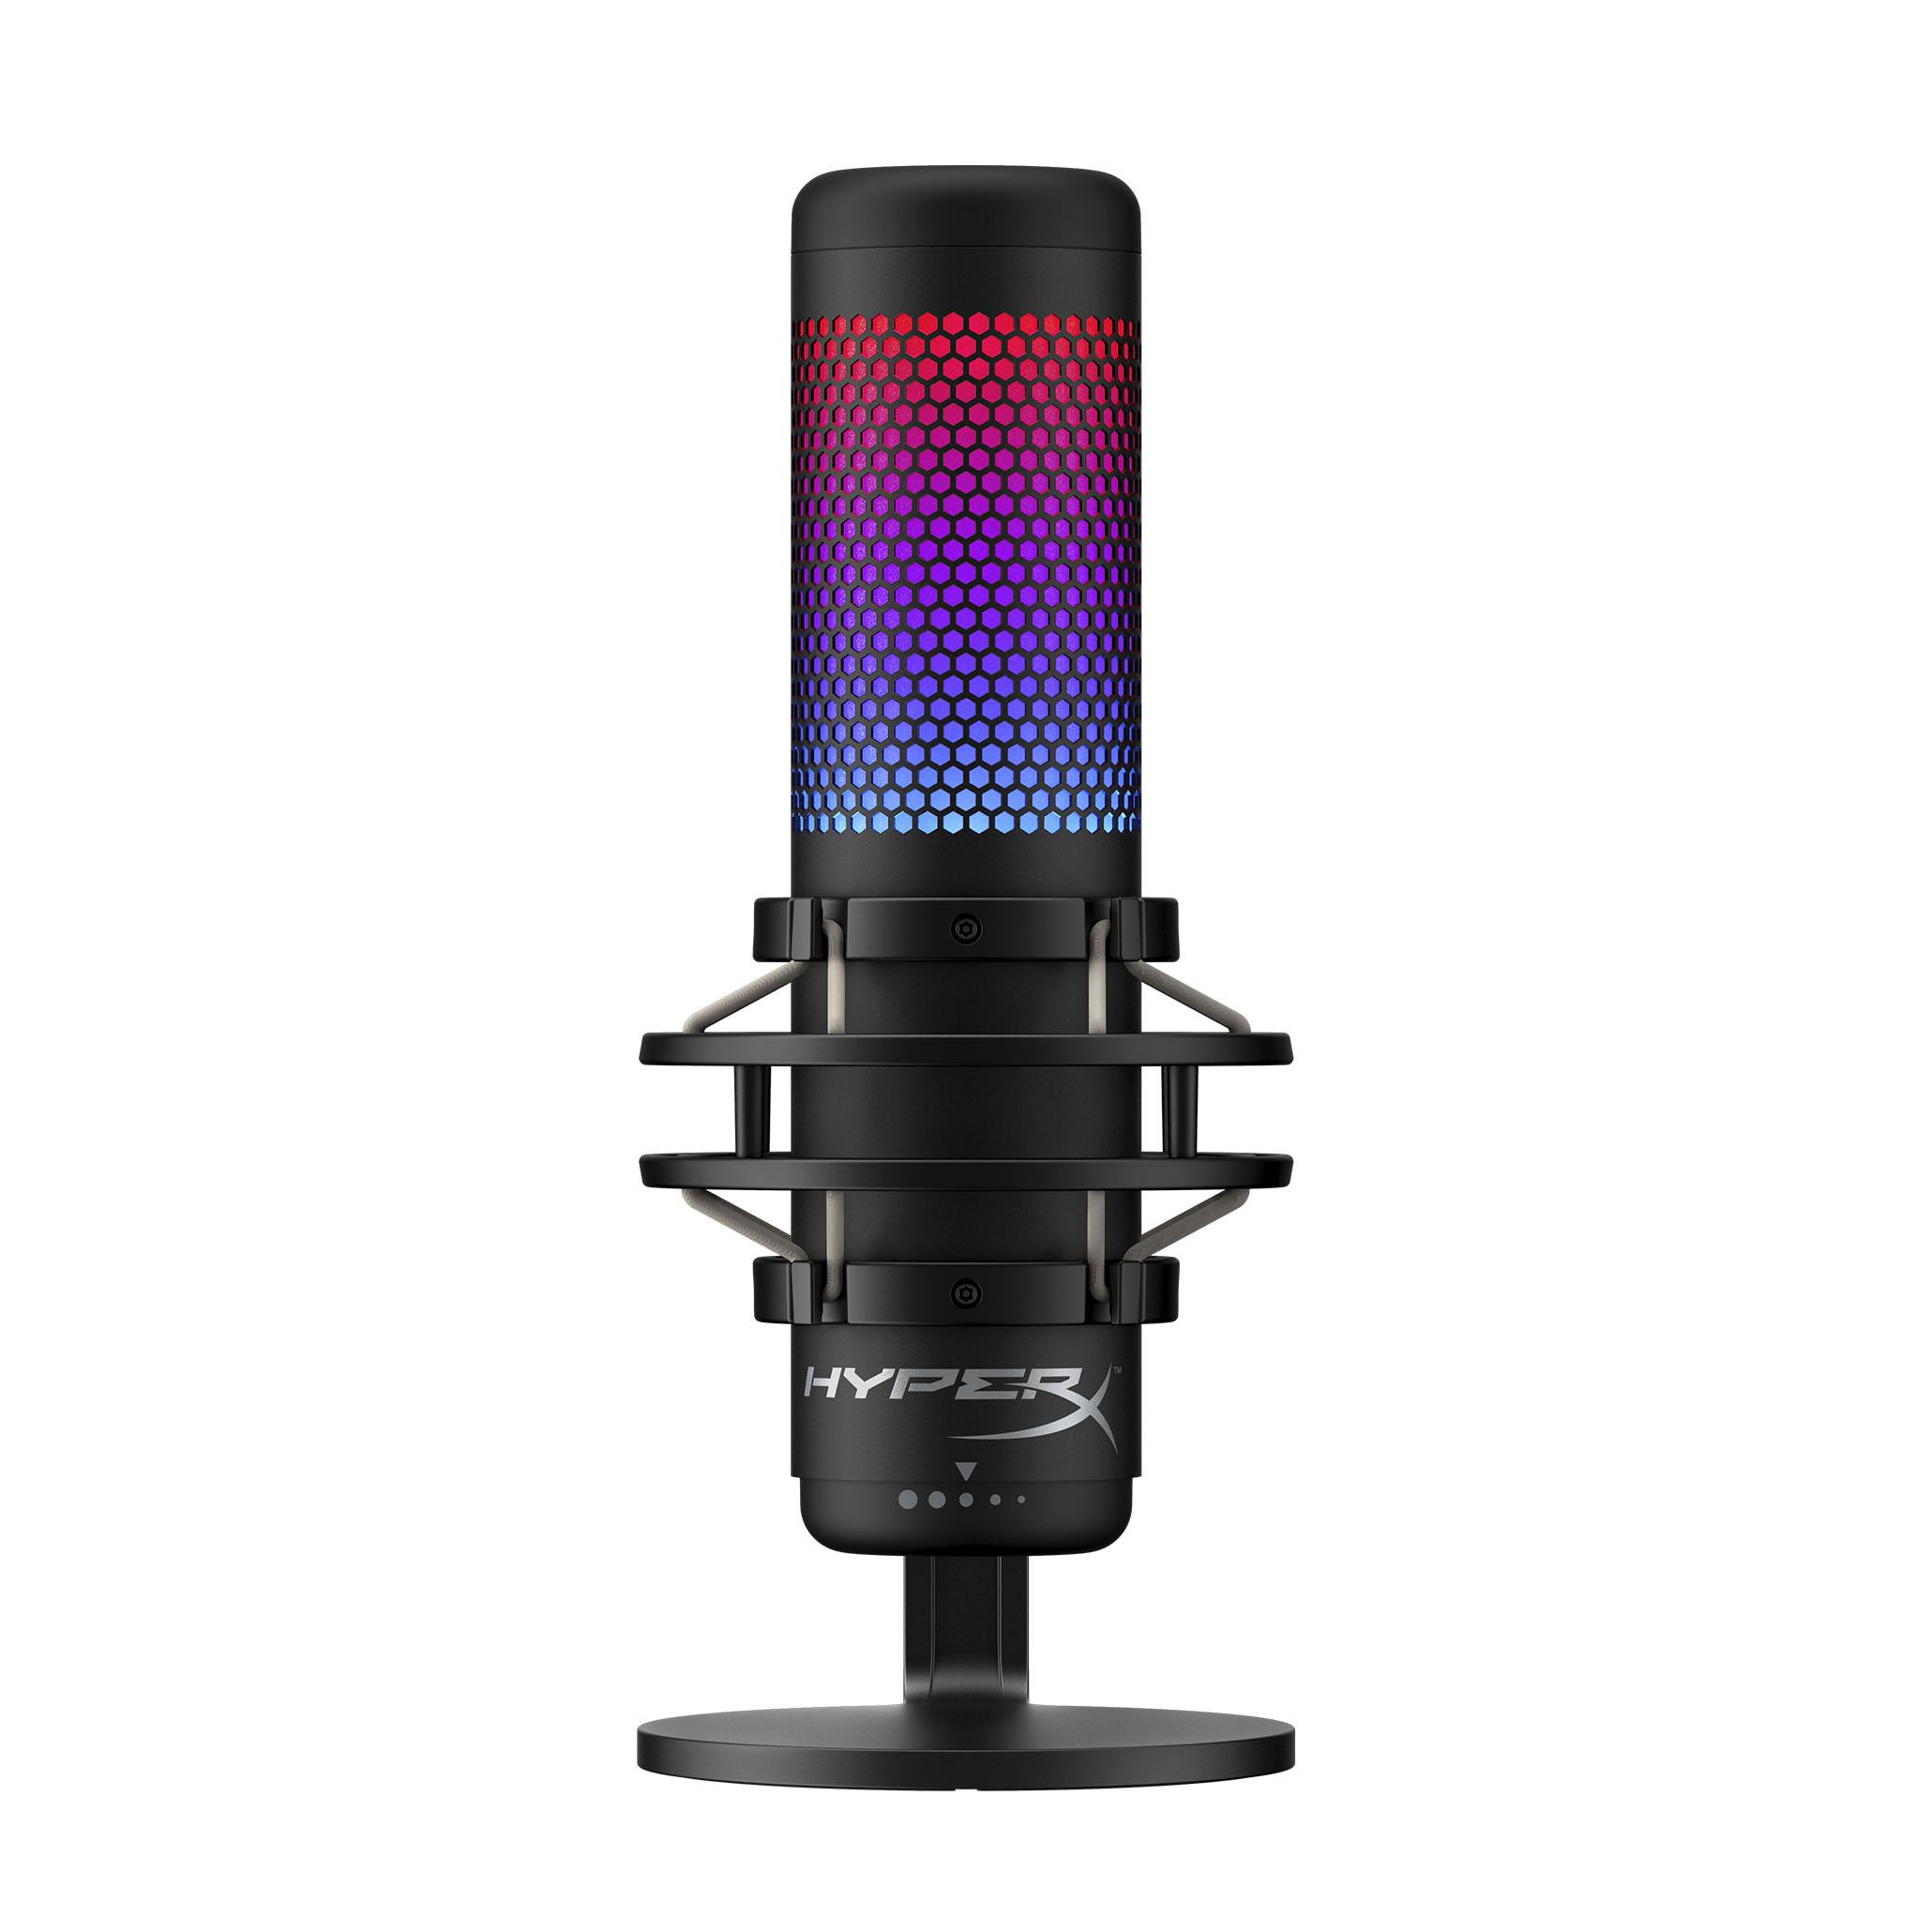 HyperX QuadCast S, RGB Microphone for the streaming, Anti-Vibration shock mount, Tap-to-Mute sensor with LED indicator, Four selectable polar patterns, Internal pop filter, Built-in headphone jack, Cable length: 3m, Black/Red, USB